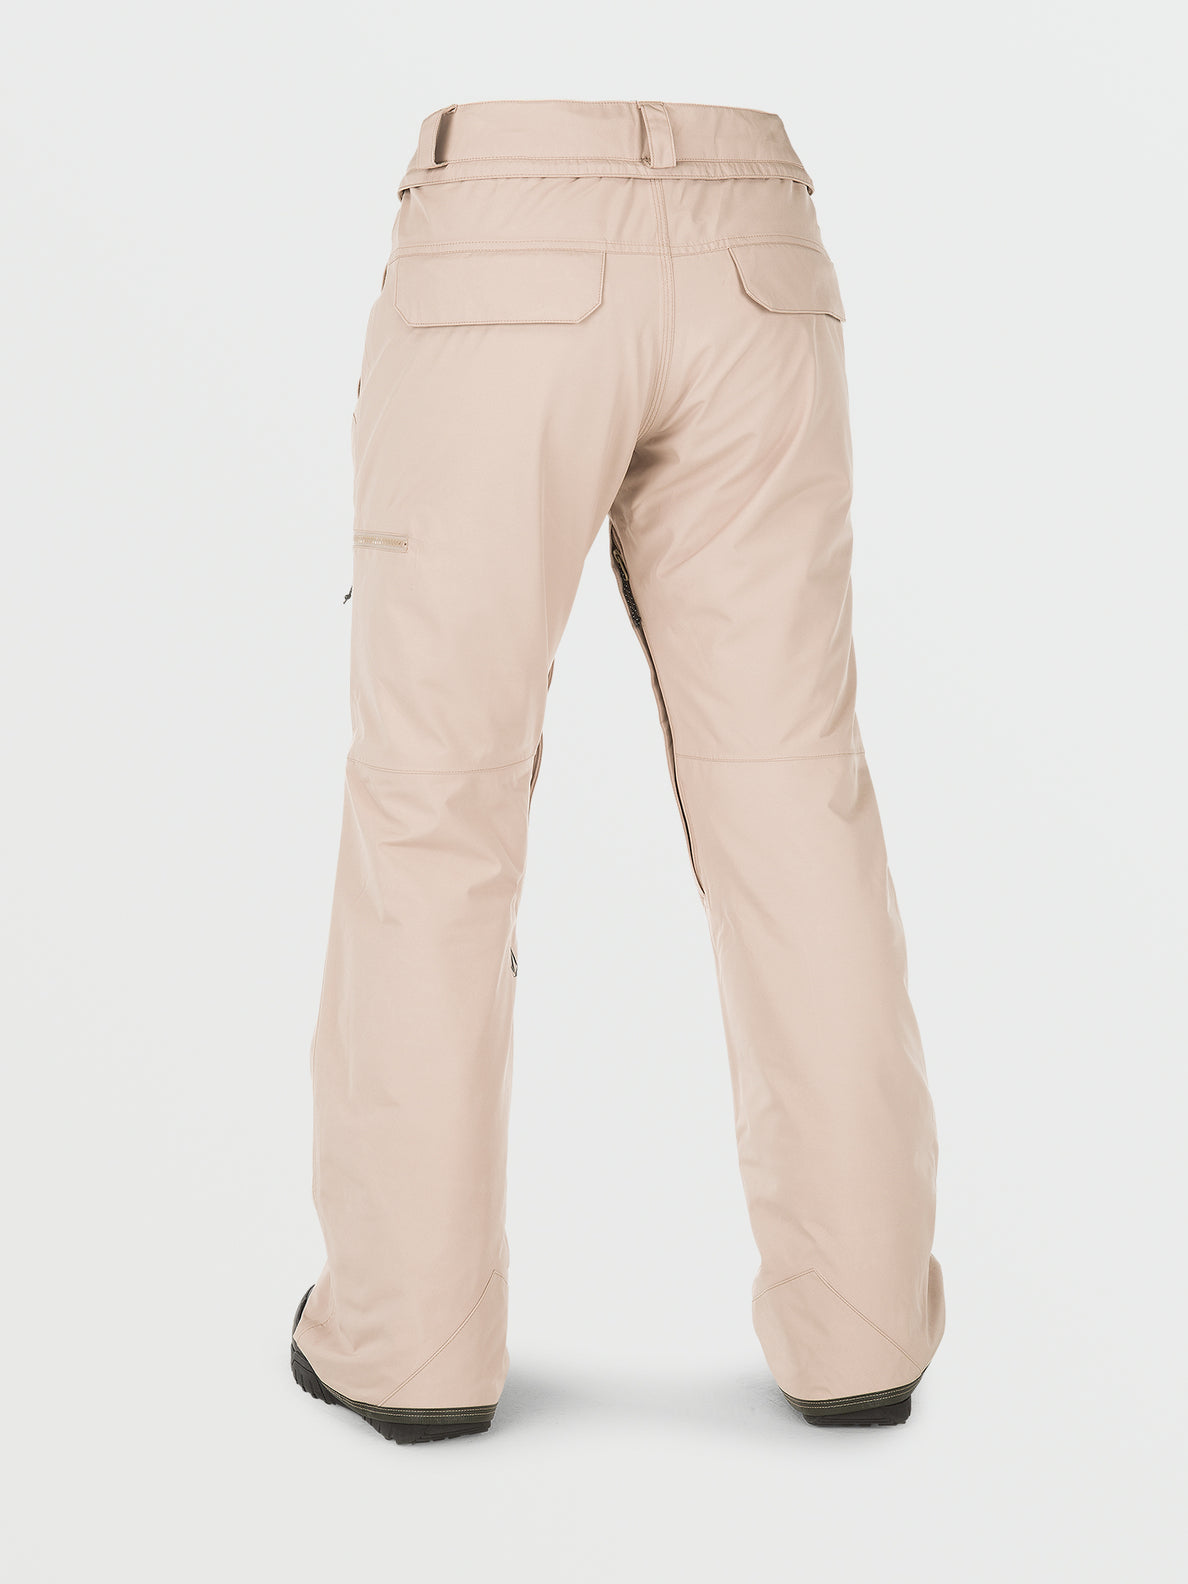 Womens Knox Insulated Gore-Tex Pants - Sand (H1252301_SAN) [6]